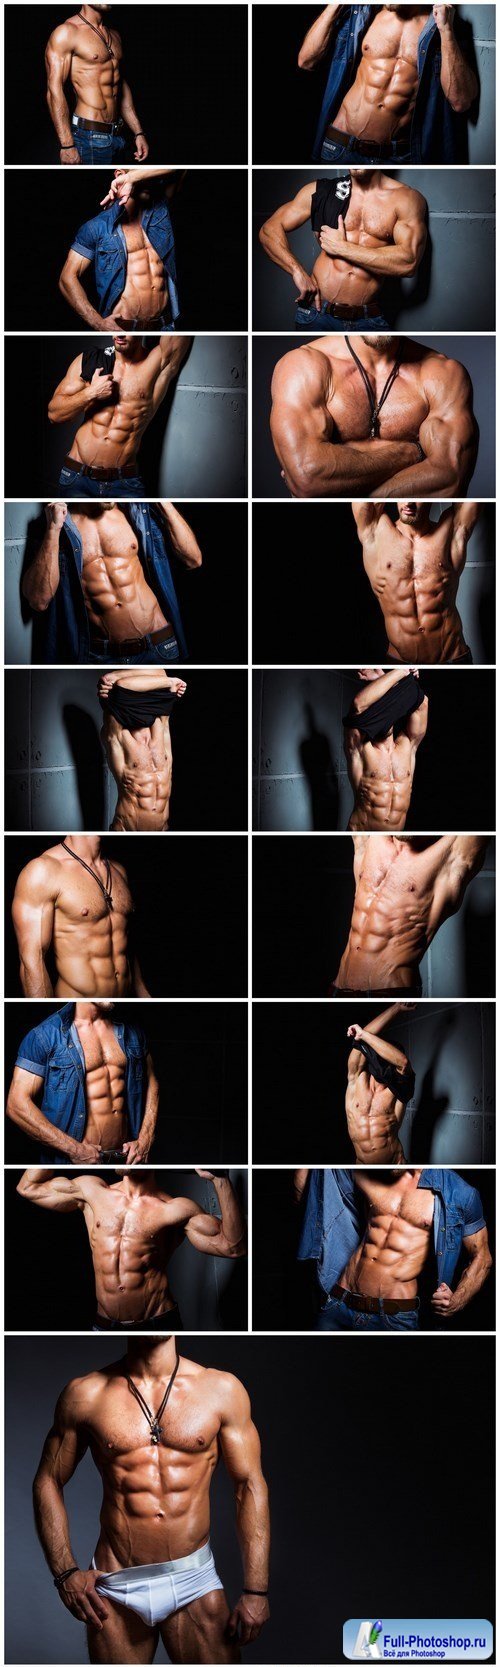 Muscular and sexy torso of young man having perfect abs 2 - 18xUHQ JPEG